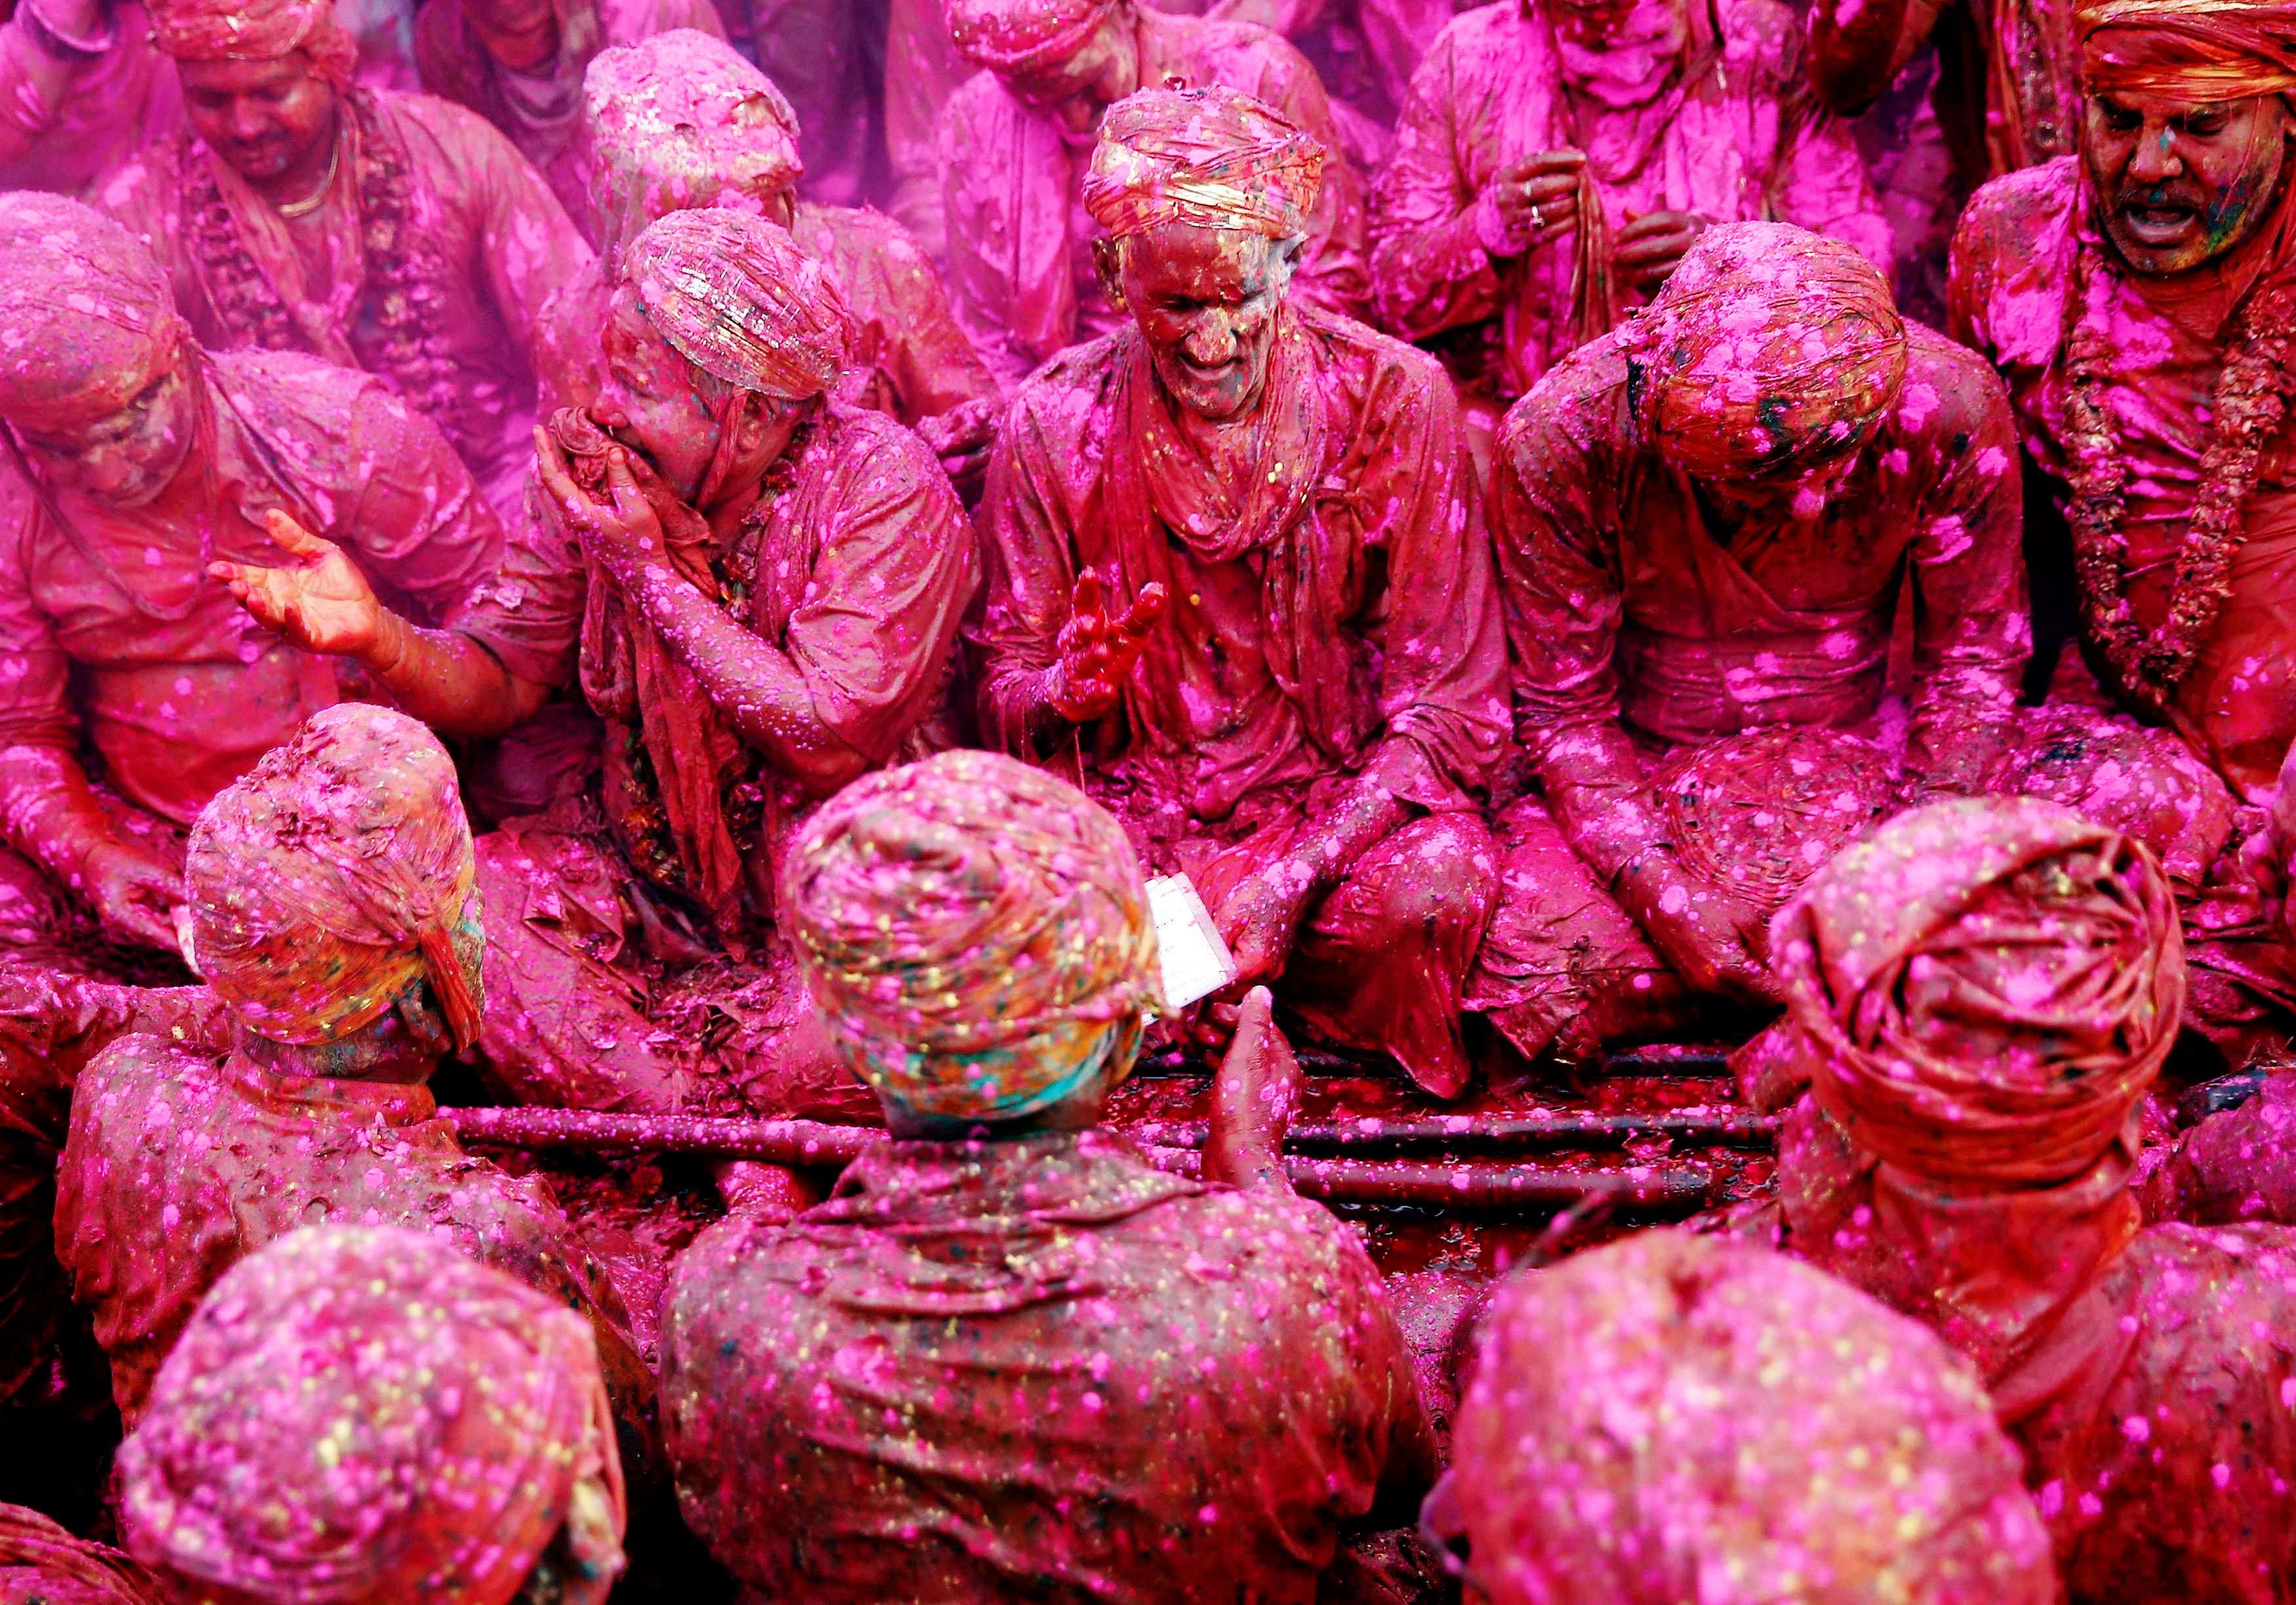 Men daubed in colours sing religious songs as they celebrate "Lathmar Holi" at Nandgaon